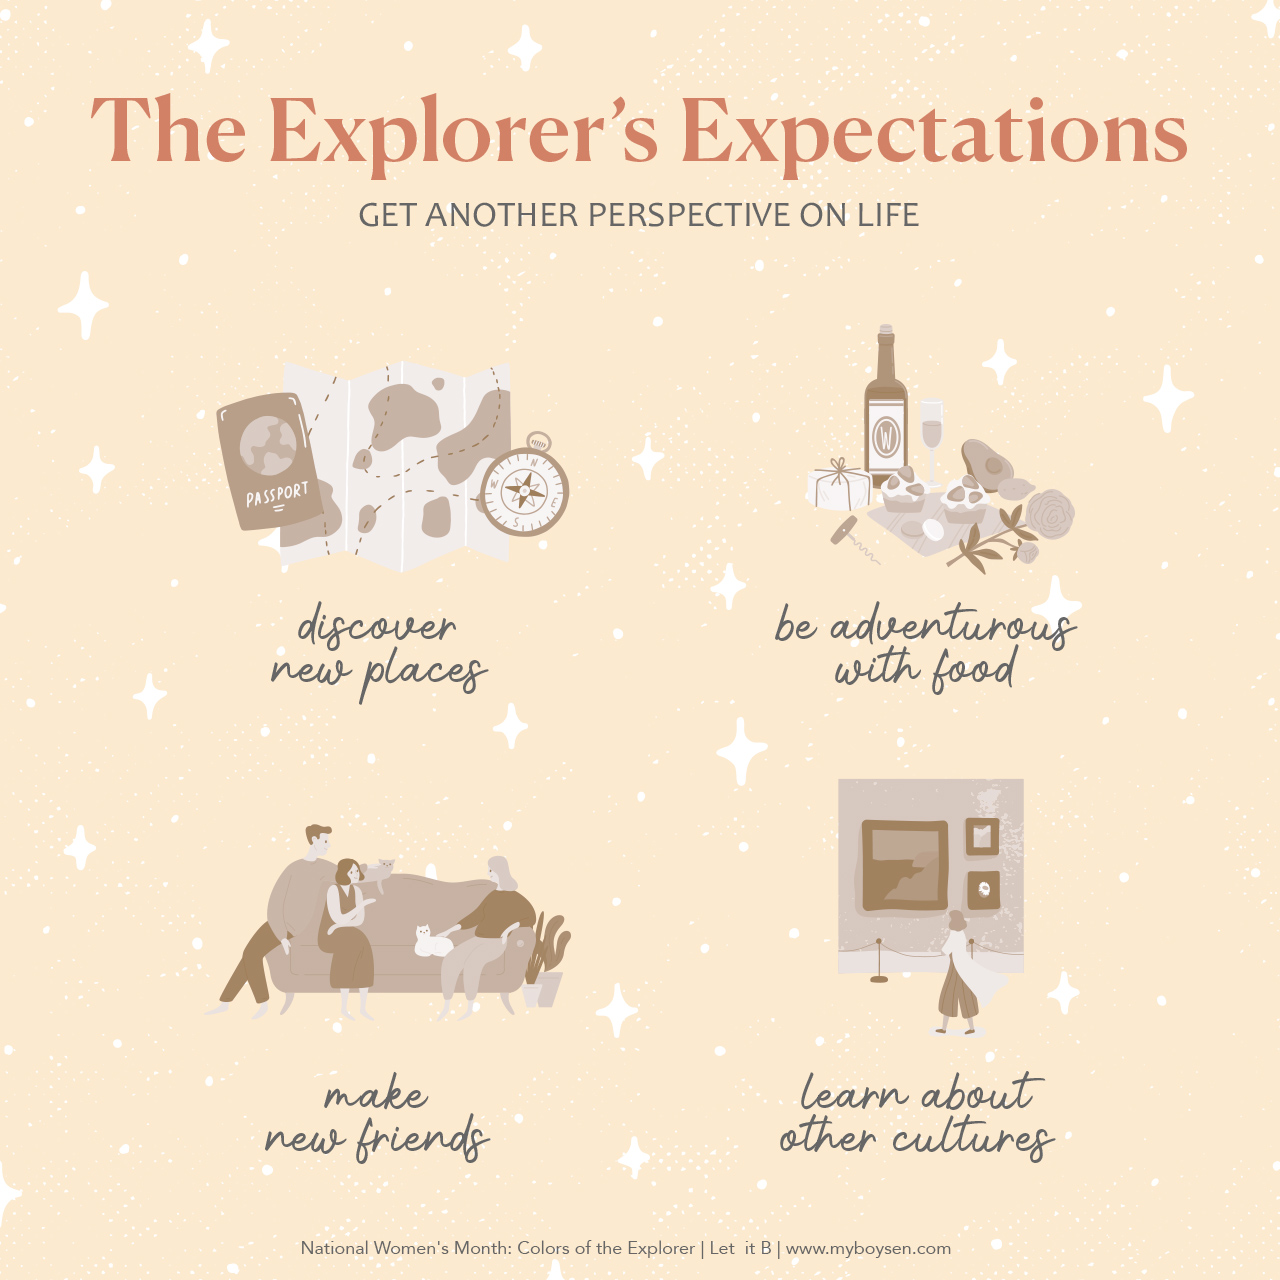 National Women's Month: Colors of the Explorer | MyBoysen